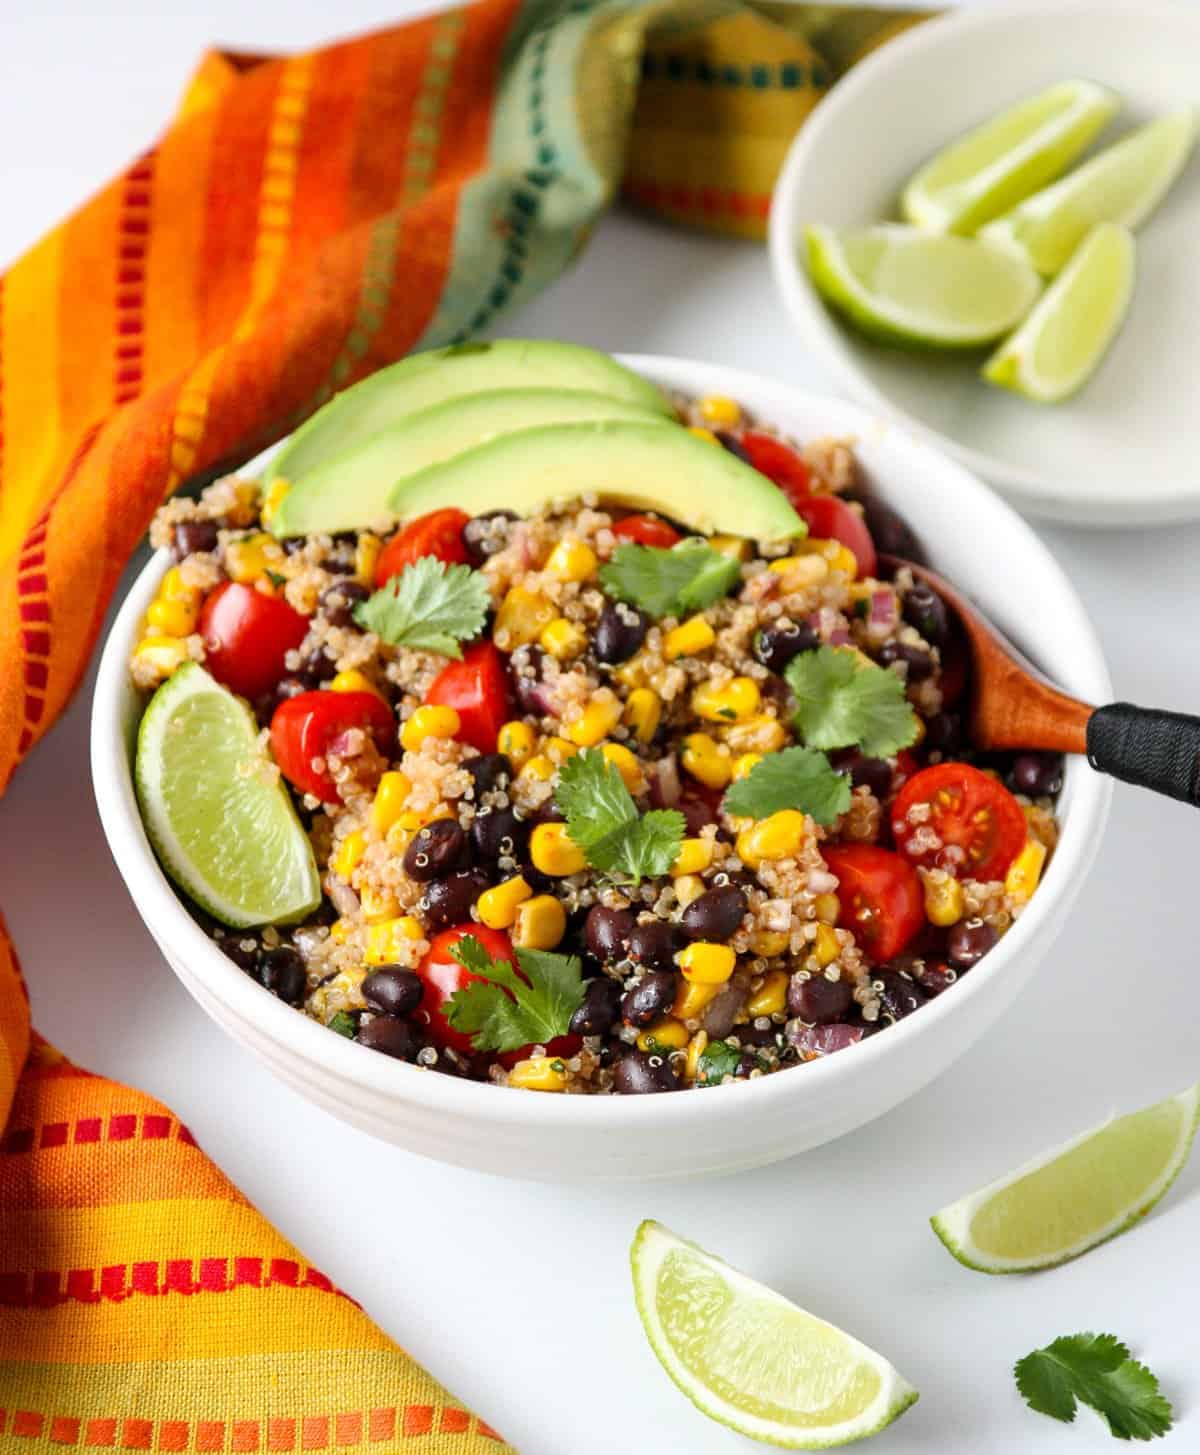 A bowl of Southwestern Quinoa Salad topped with avocado slices with a wooden fork.